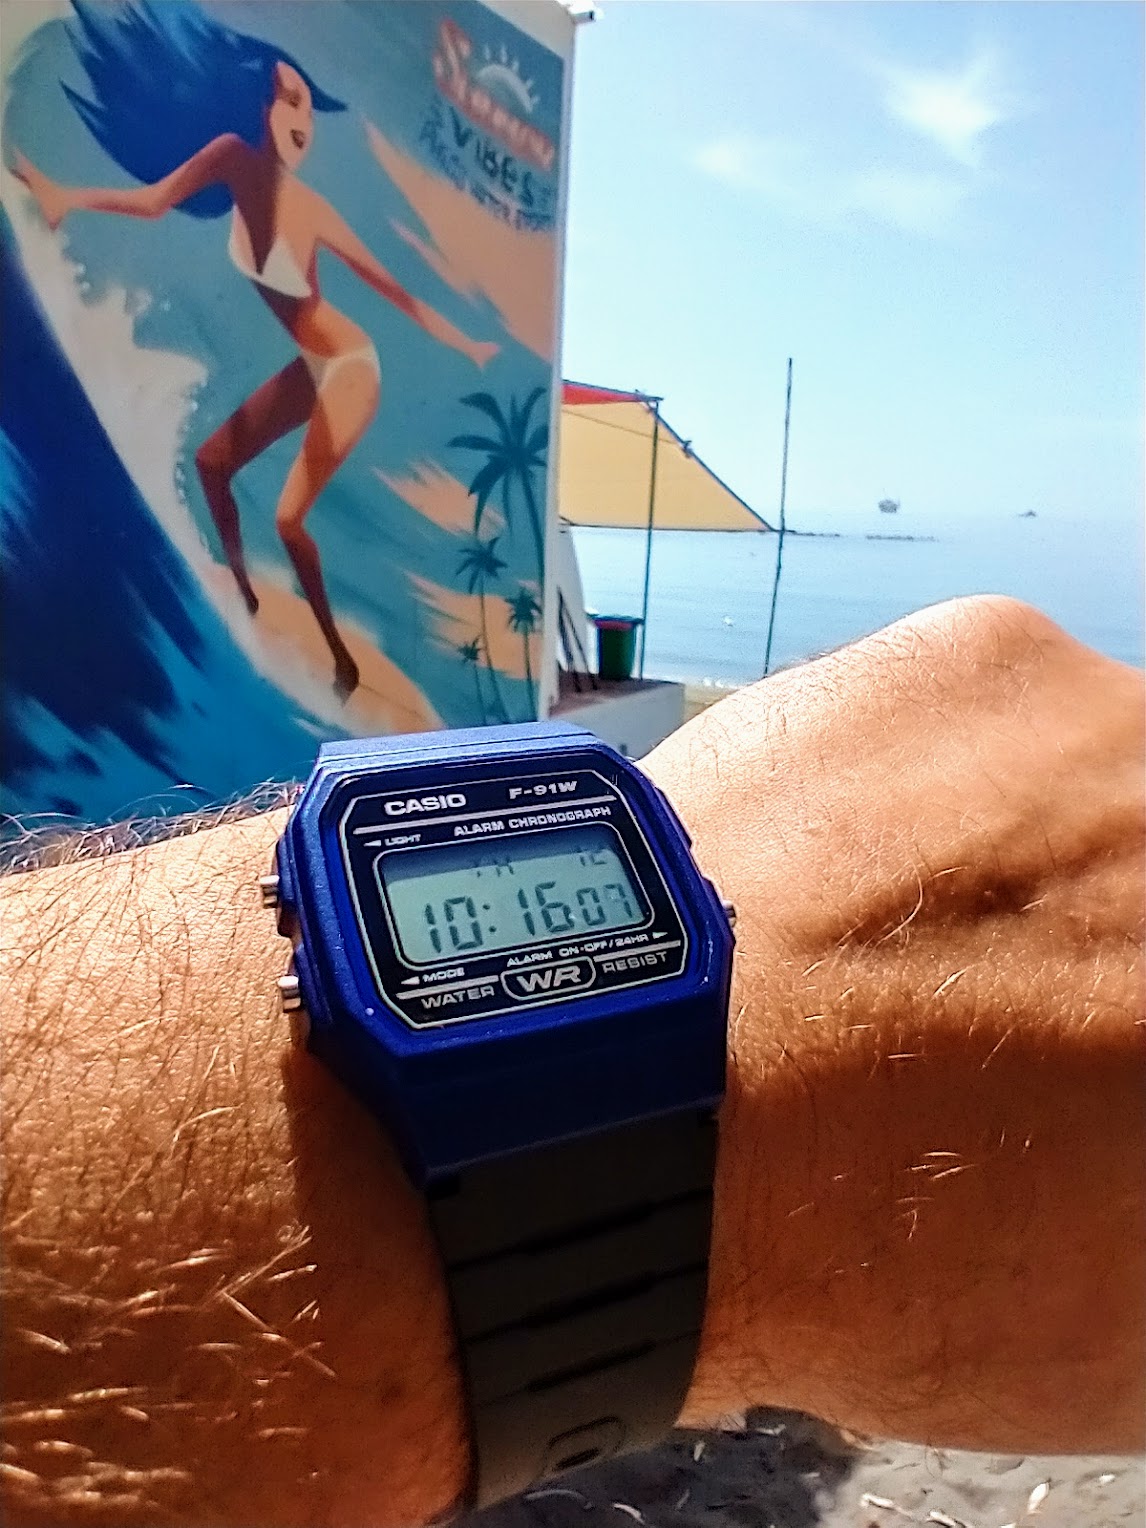 Michael on Twitter: "Happy Thursday watch lovers, morning summer vibes with fun little Casio F-91W Short review https://t.co/MPzw3L1yP1 #coolwatchreviews #watches #thursdayvibes / Twitter